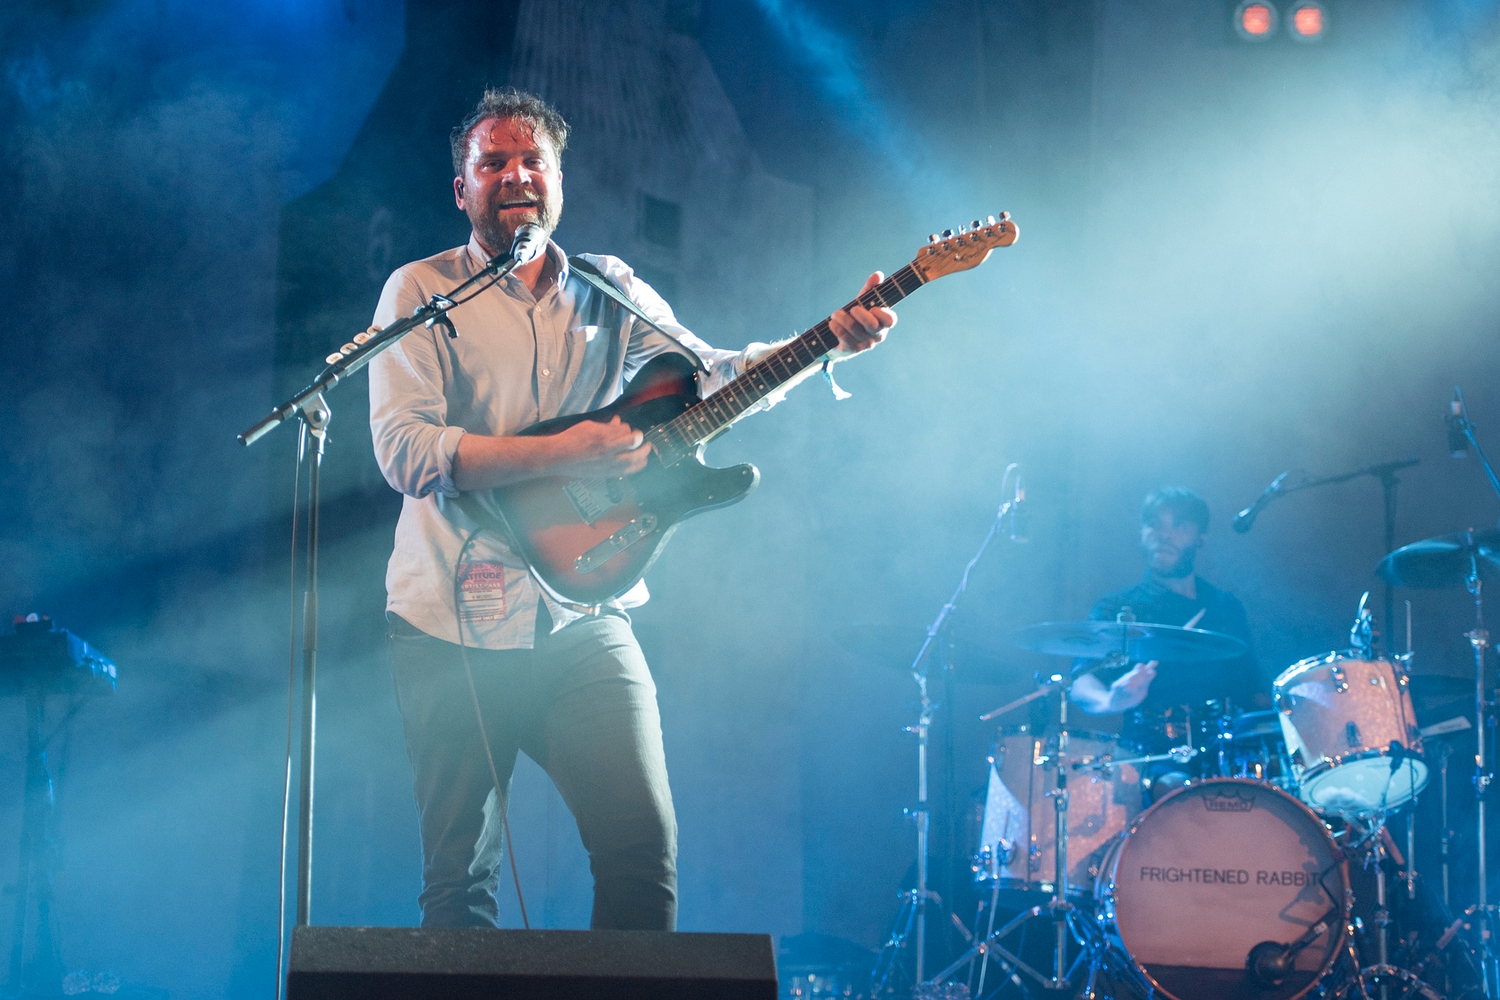 "If something feels right, then maybe it's right. That's what this album proved" - Frightened Rabbit's Scott Hutchison talks 10 years of 'The Midnight Organ Fight'